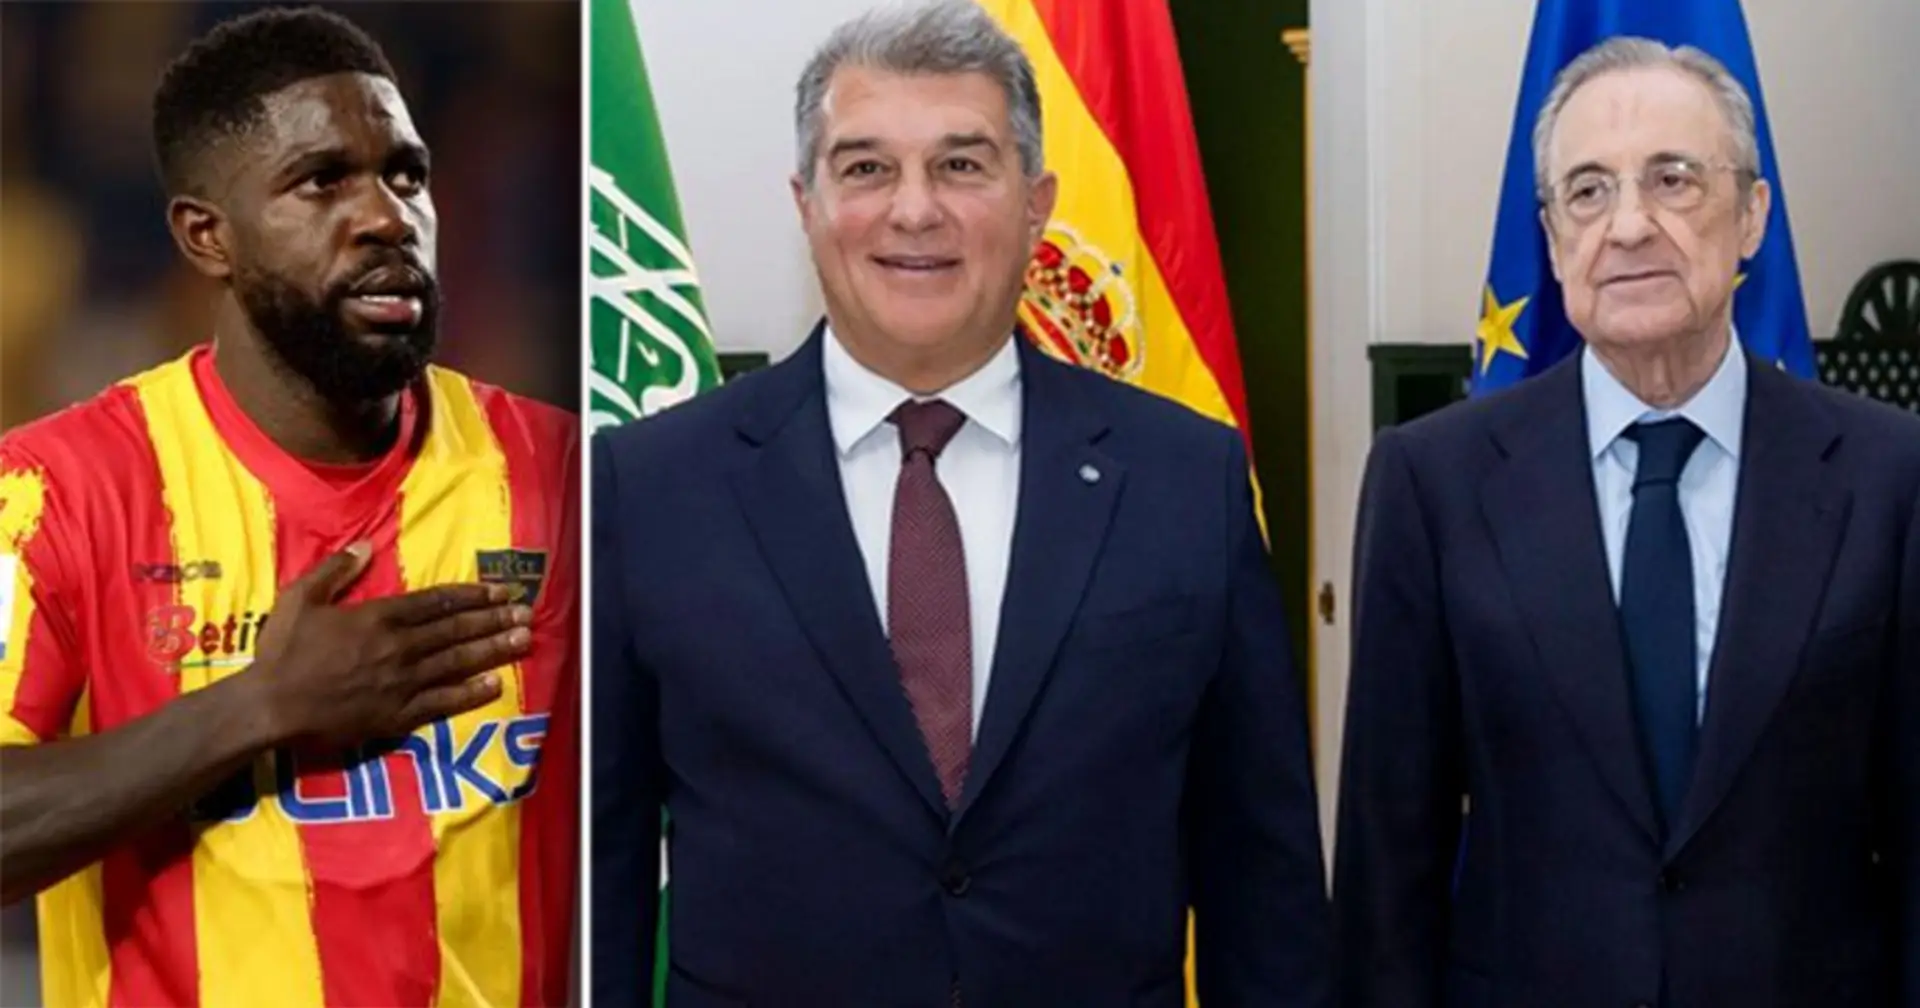 Laporta meets Florentino Perez ahead of Clasico and 2 more under-radar stories of the day